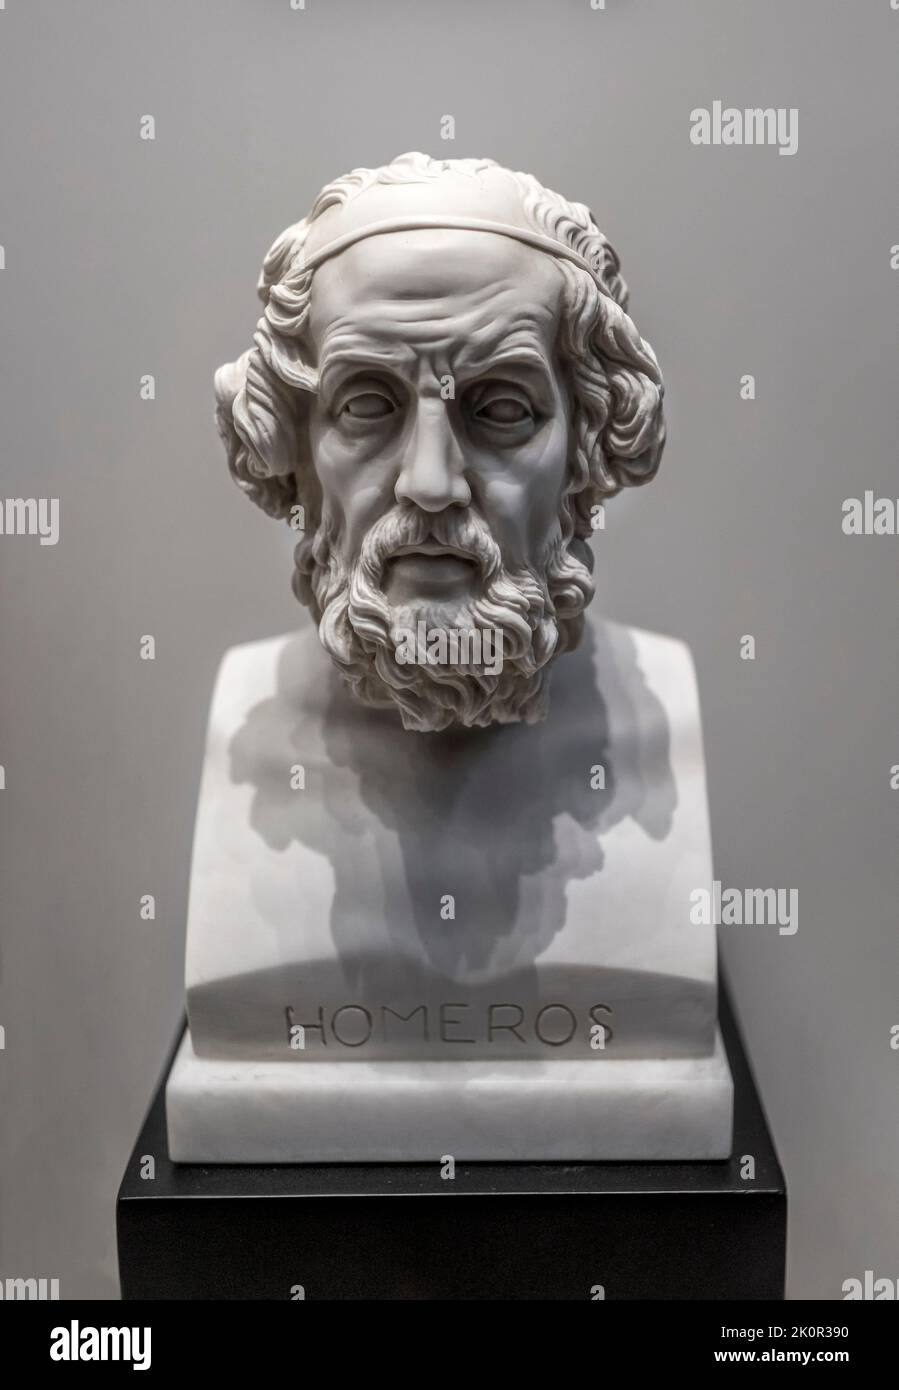 Sculpture of Homer in Istanbul Archeology Museum, Turkey. Stock Photo